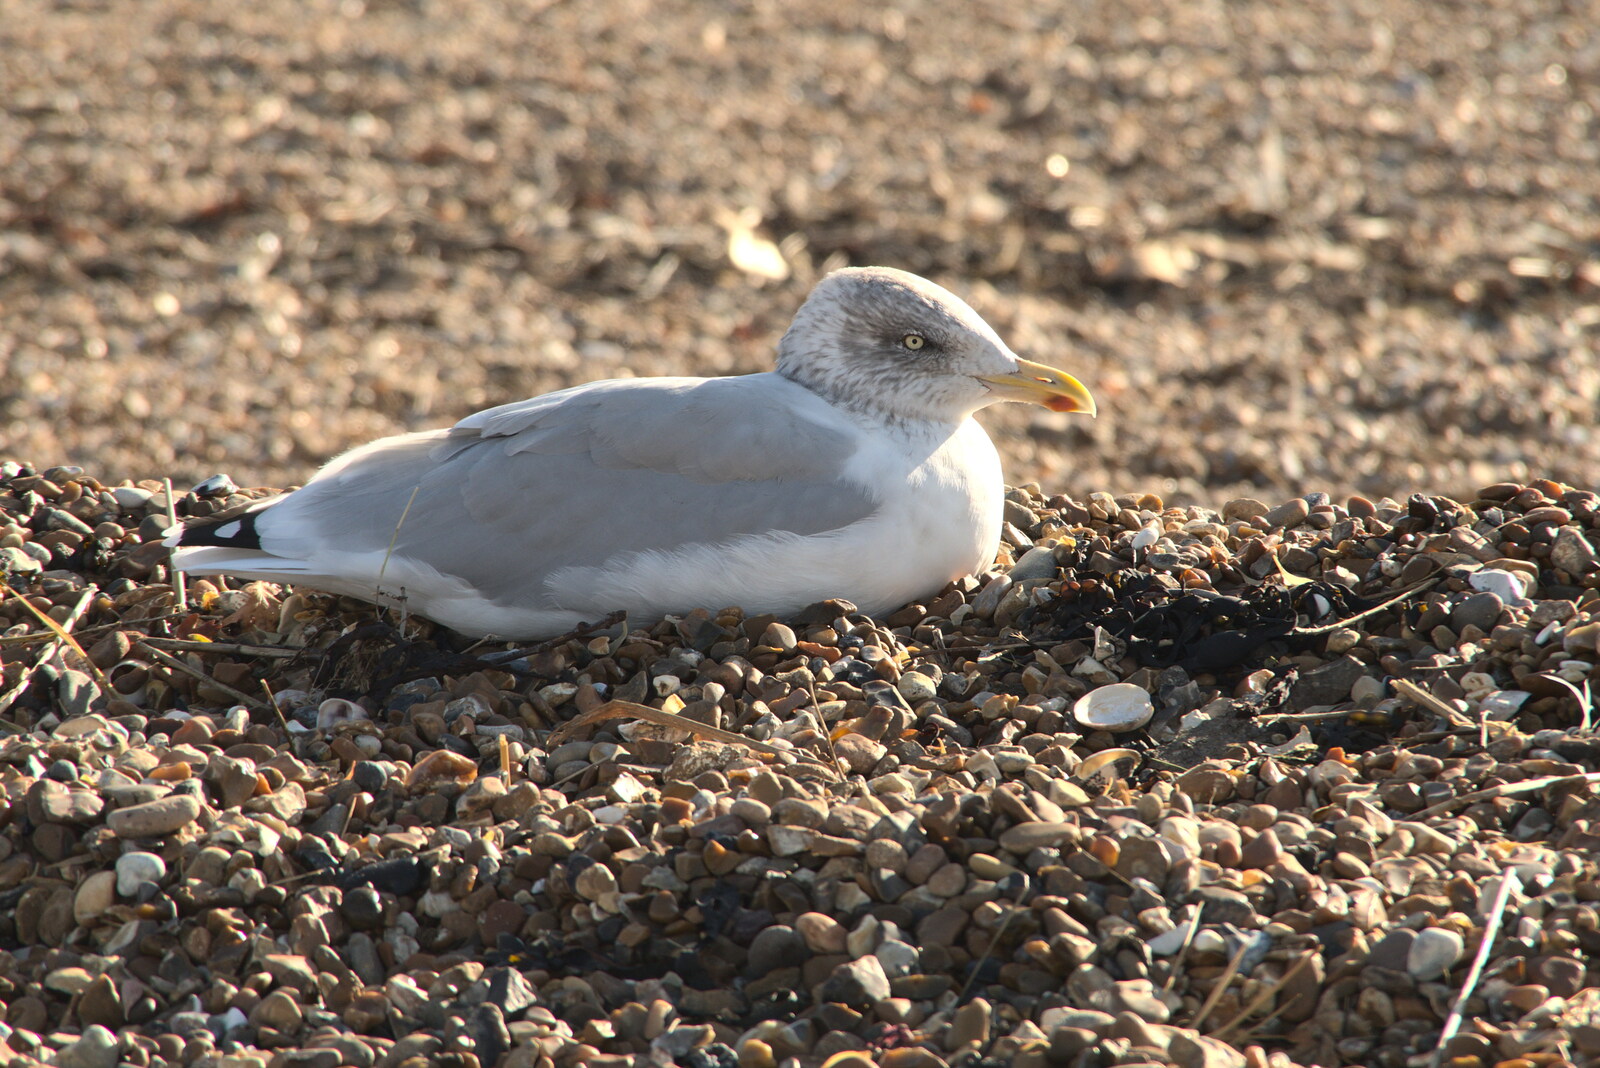 A Postcard from Felixstowe, Suffolk - 5th October 2022: A juvenile gull sits on the beach